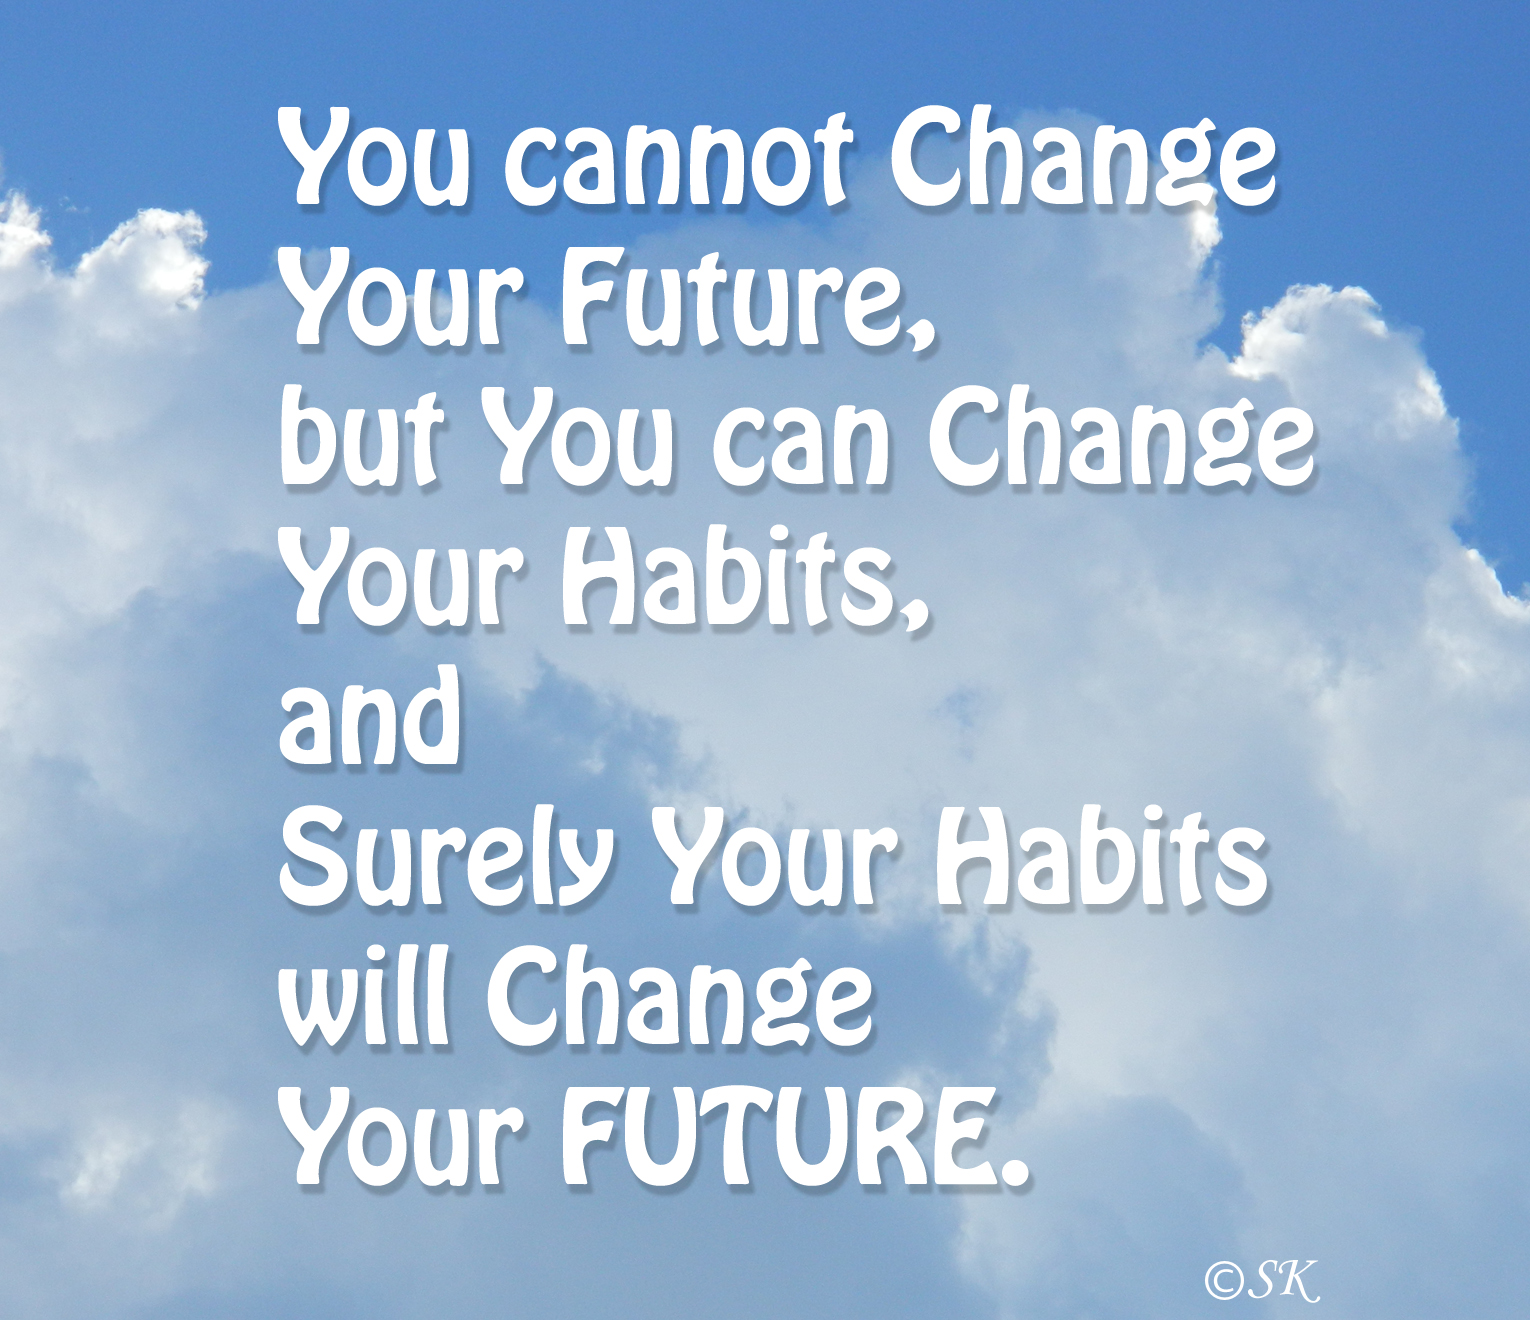 Image result for "You cannot change your future, but you can change your habits, and surely your habits will change your future." blogspot.com